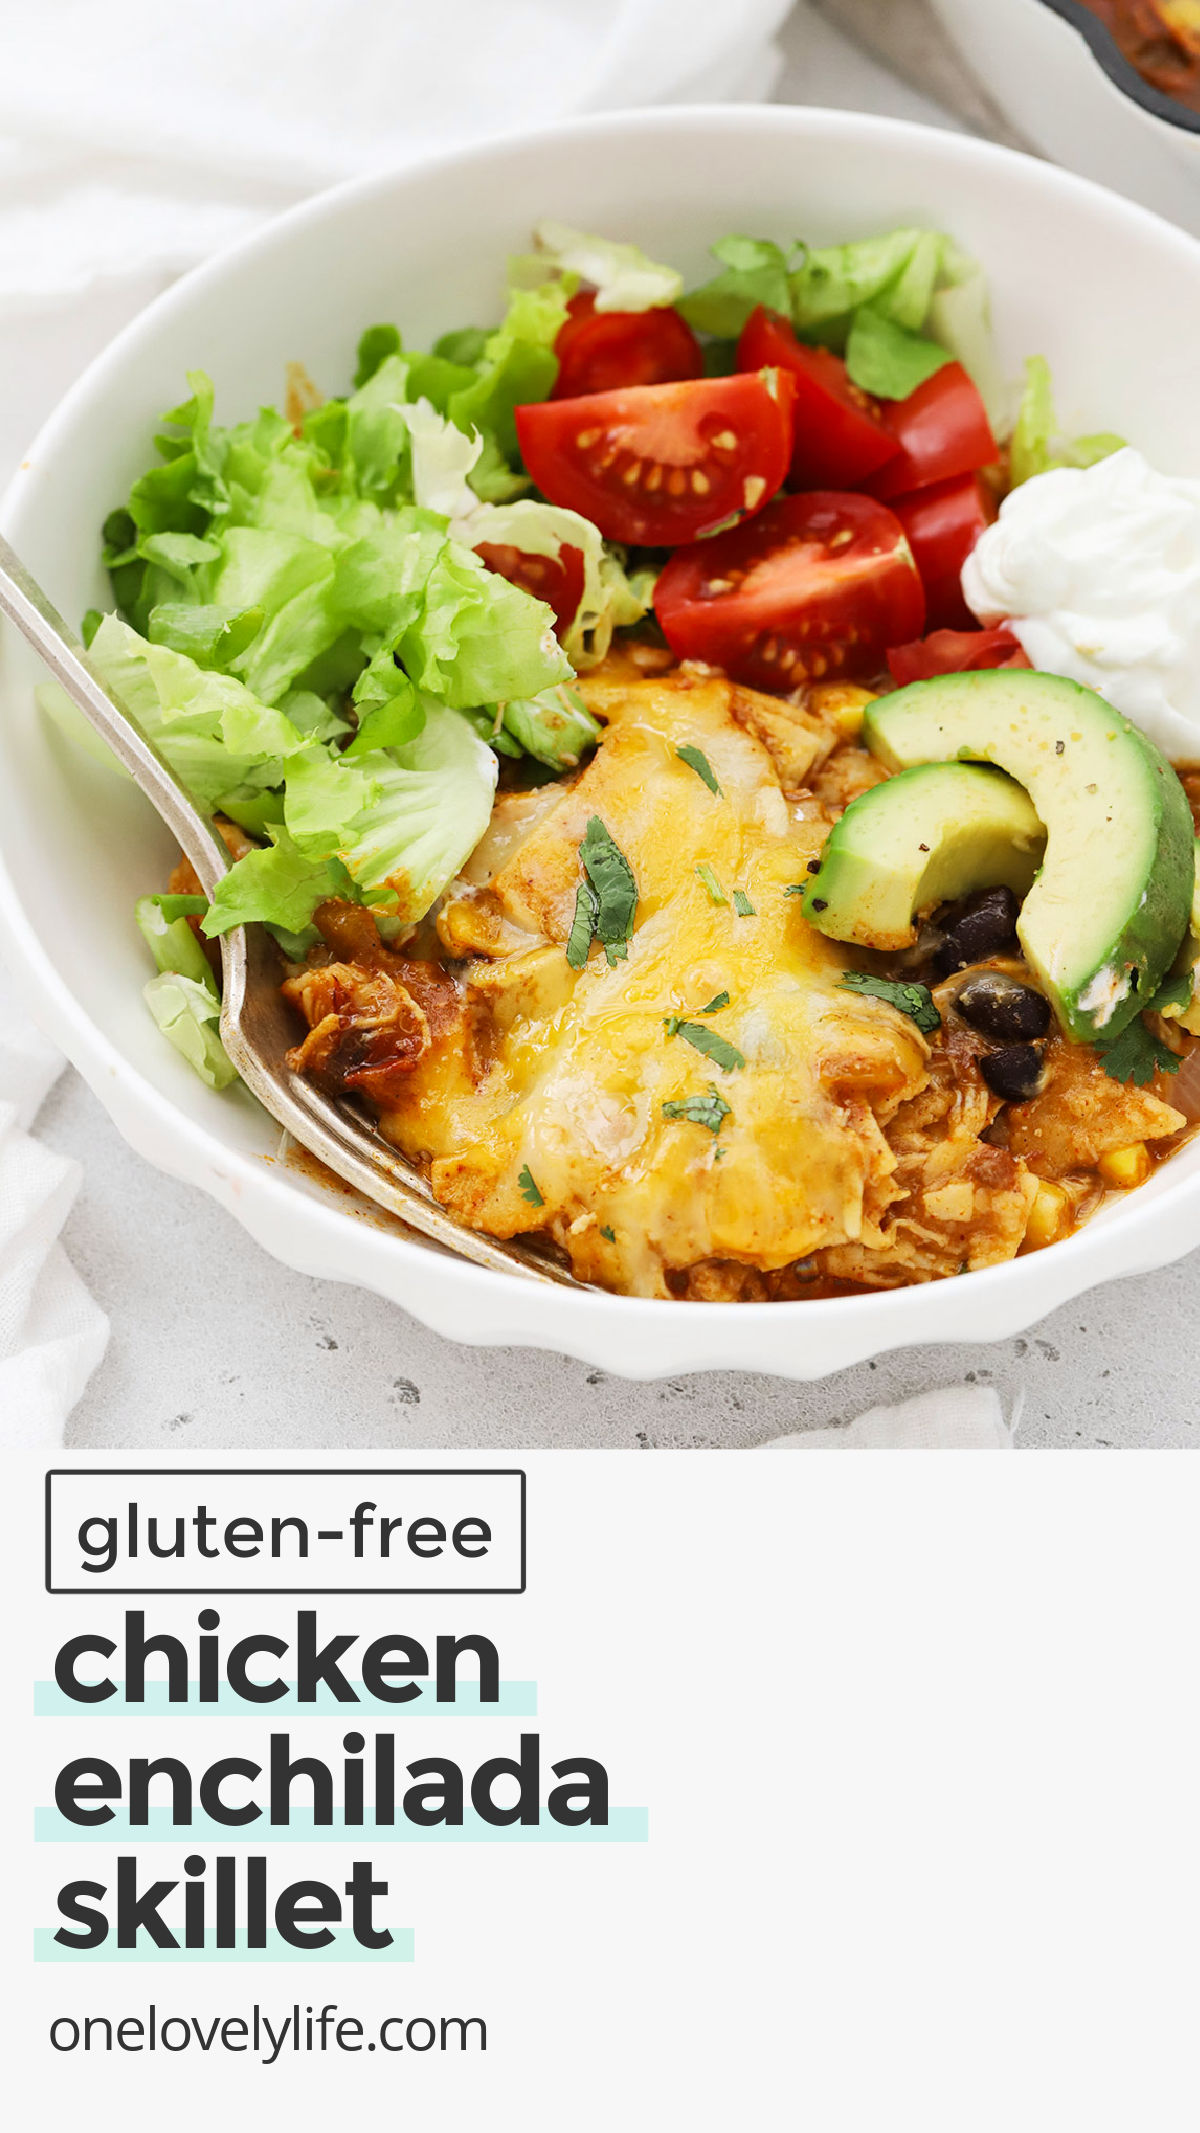 Easy Chicken Enchilada Skillet - This enchilada bake is made in one pan and PACKED with delicious flavor. You'll love this easy dinner recipe! // One Pan Dinner // Skillet Dinner / Easy Healthy Dinner Ideas / Healthy Dinner Recipe / Gluten Free Dinner / Enchilada skillet recipe / chicken enchilada skillet recipe / gluten free chicken enchilada skillet / gluten free one pan dinner